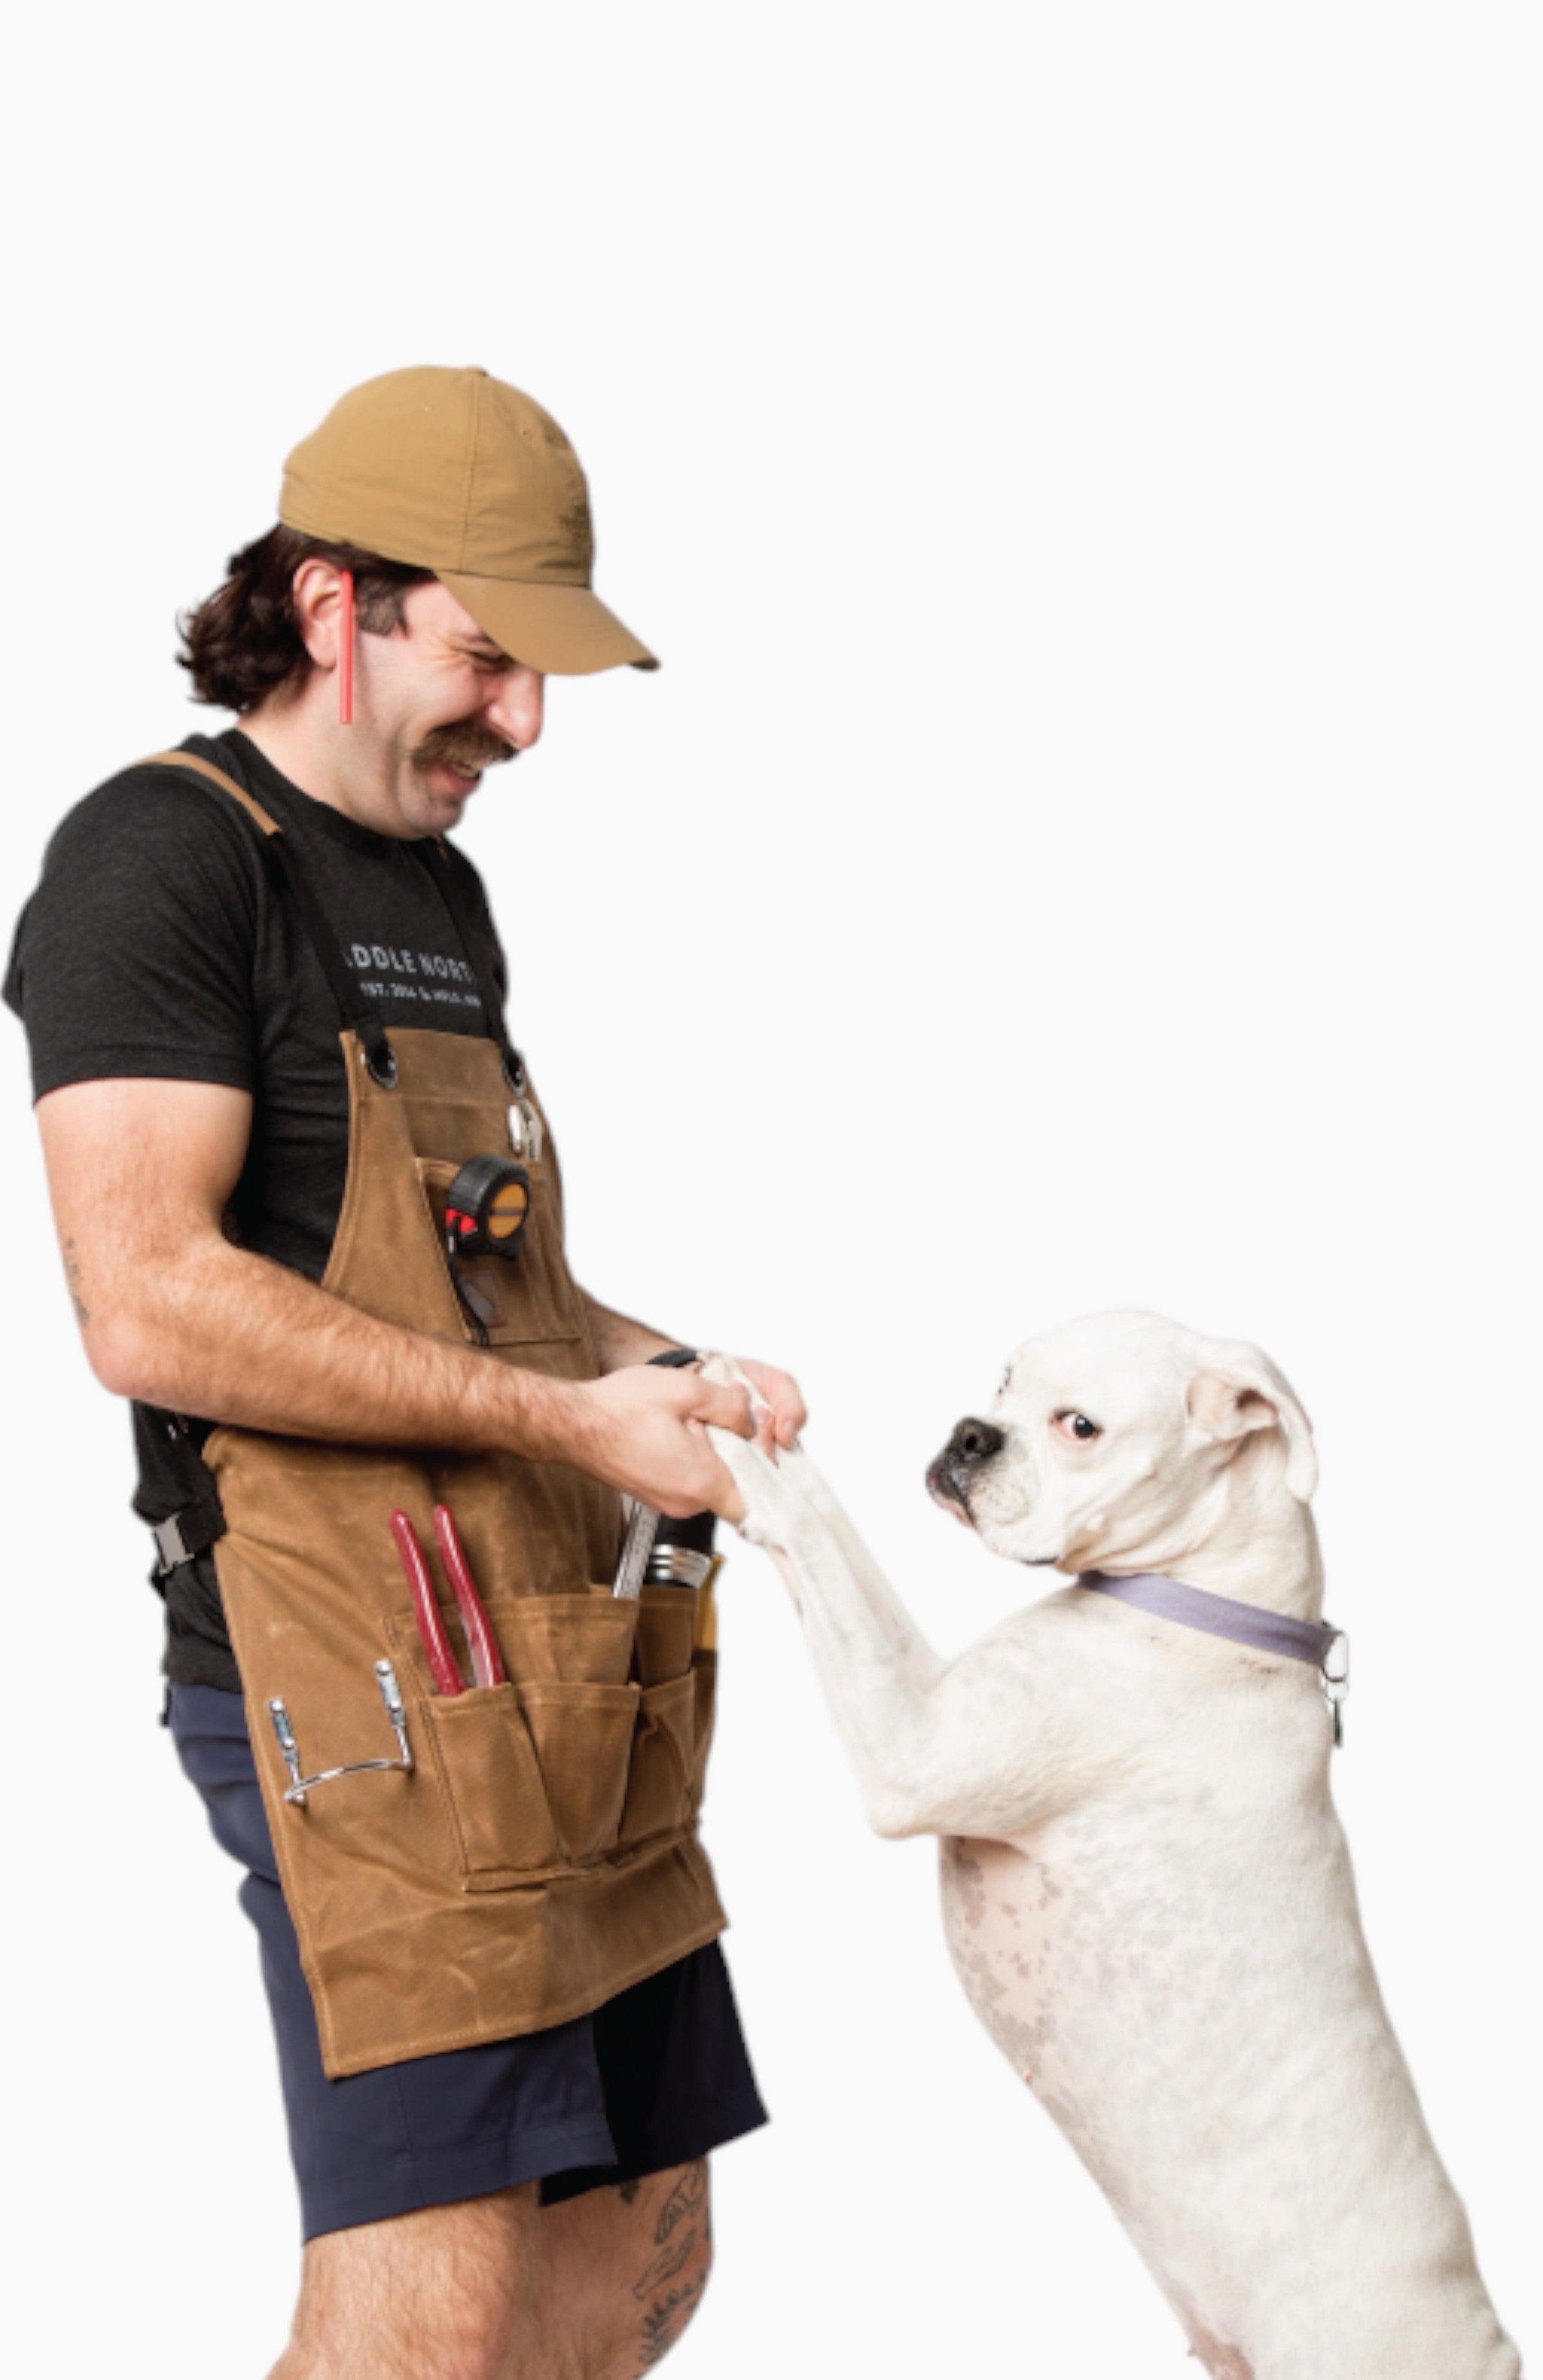 Man wearing a brown leather apron playing with a dog.